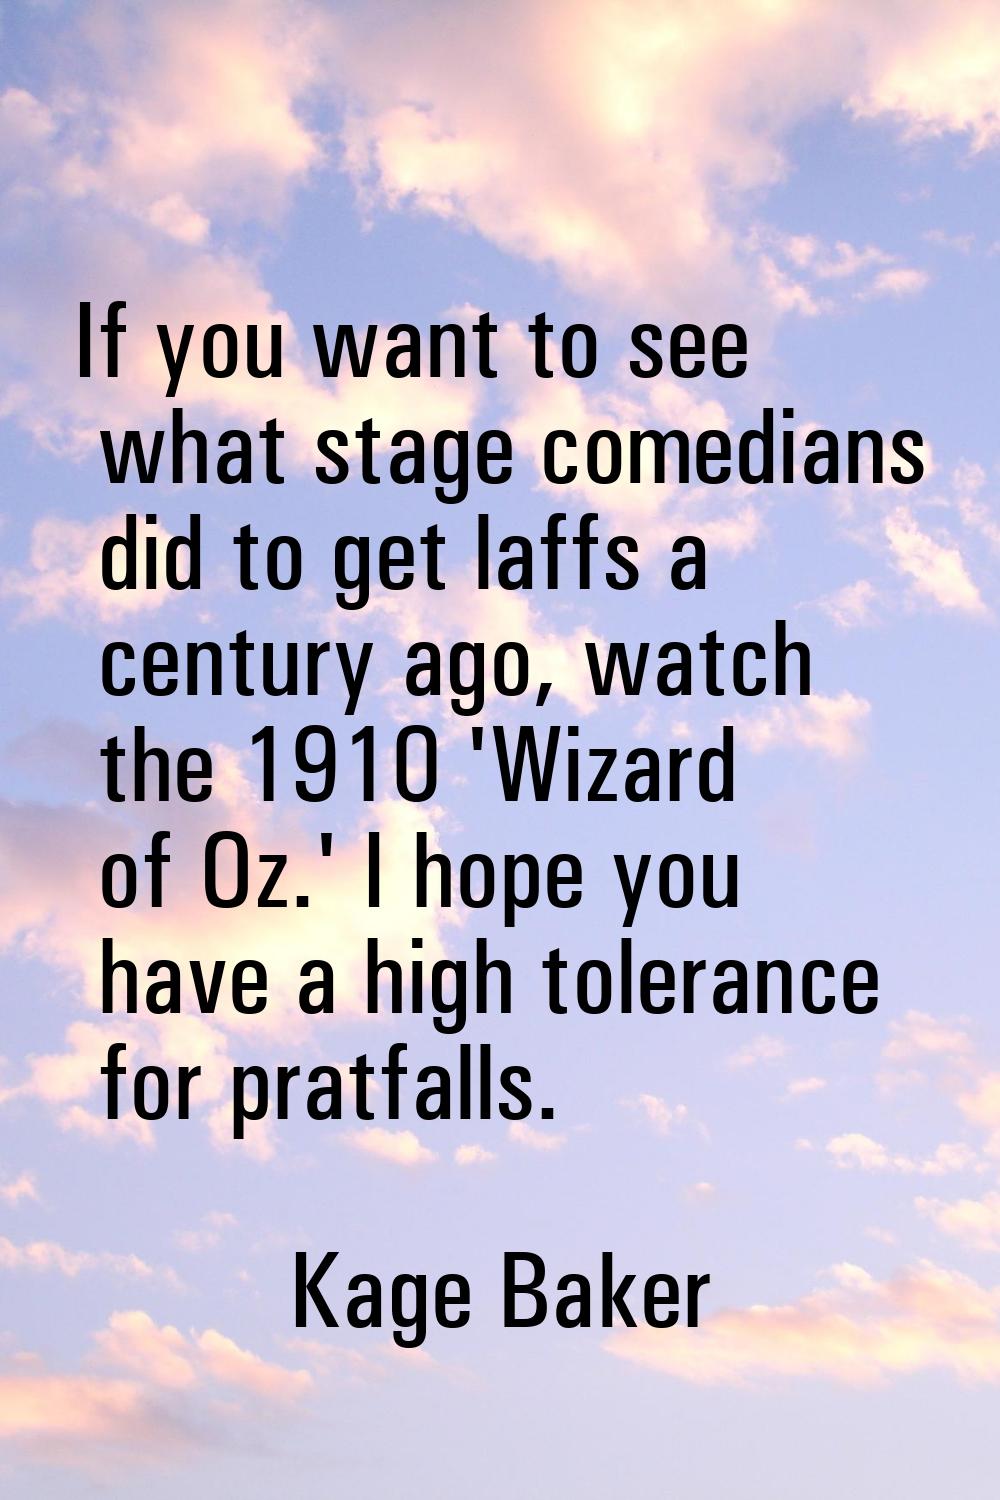 If you want to see what stage comedians did to get laffs a century ago, watch the 1910 'Wizard of O